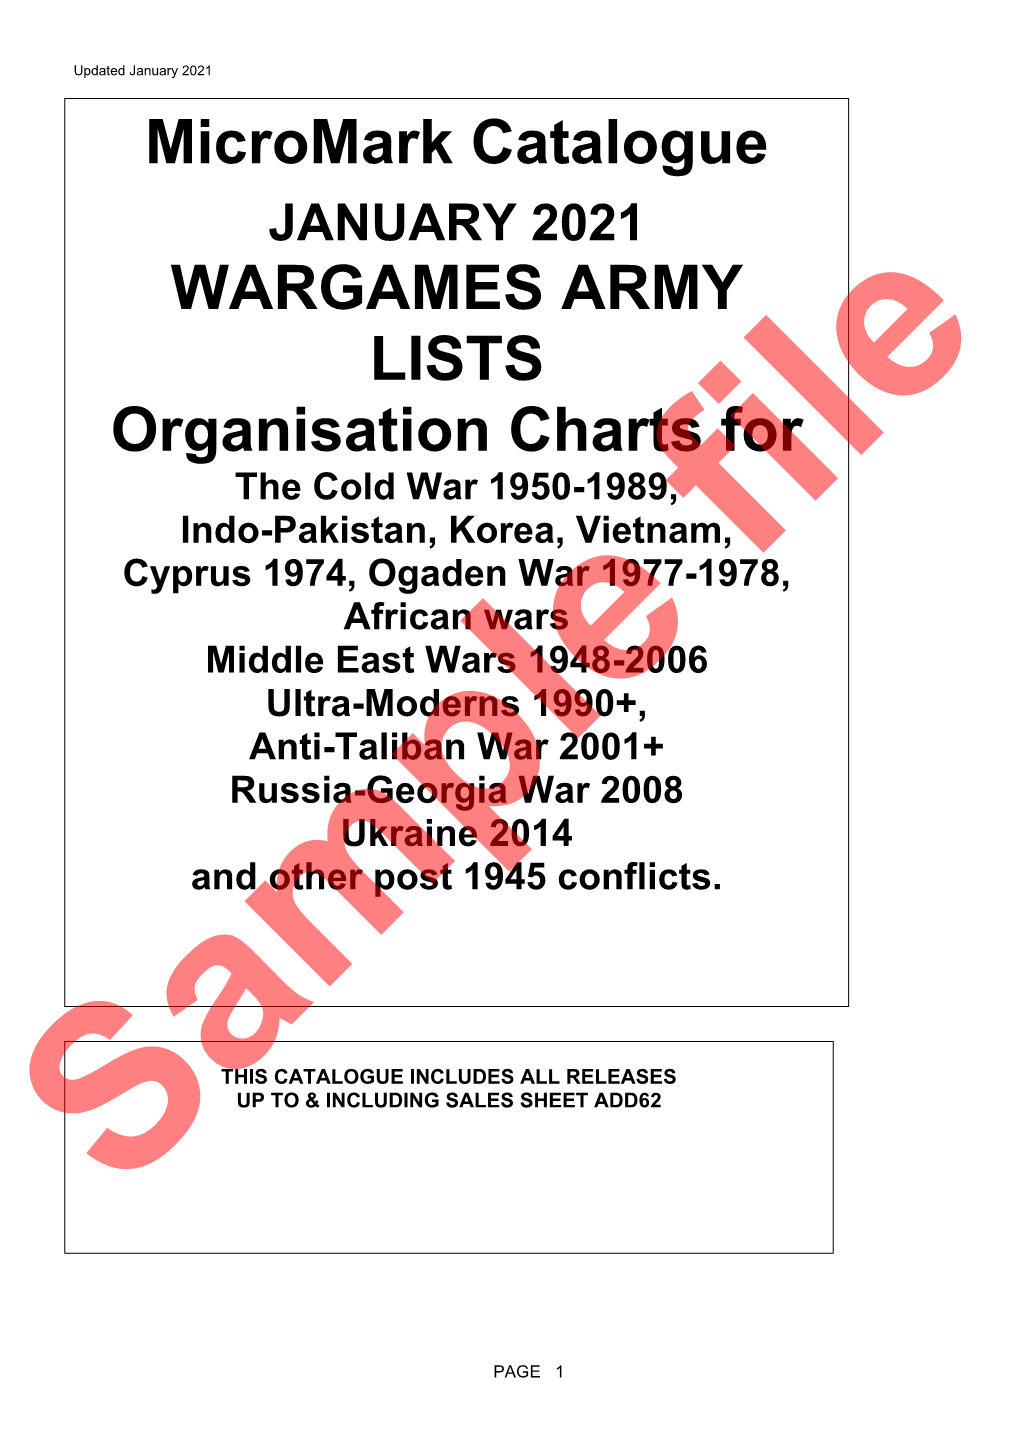 Micromark Catalogue WARGAMES ARMY LISTS Organisation Charts